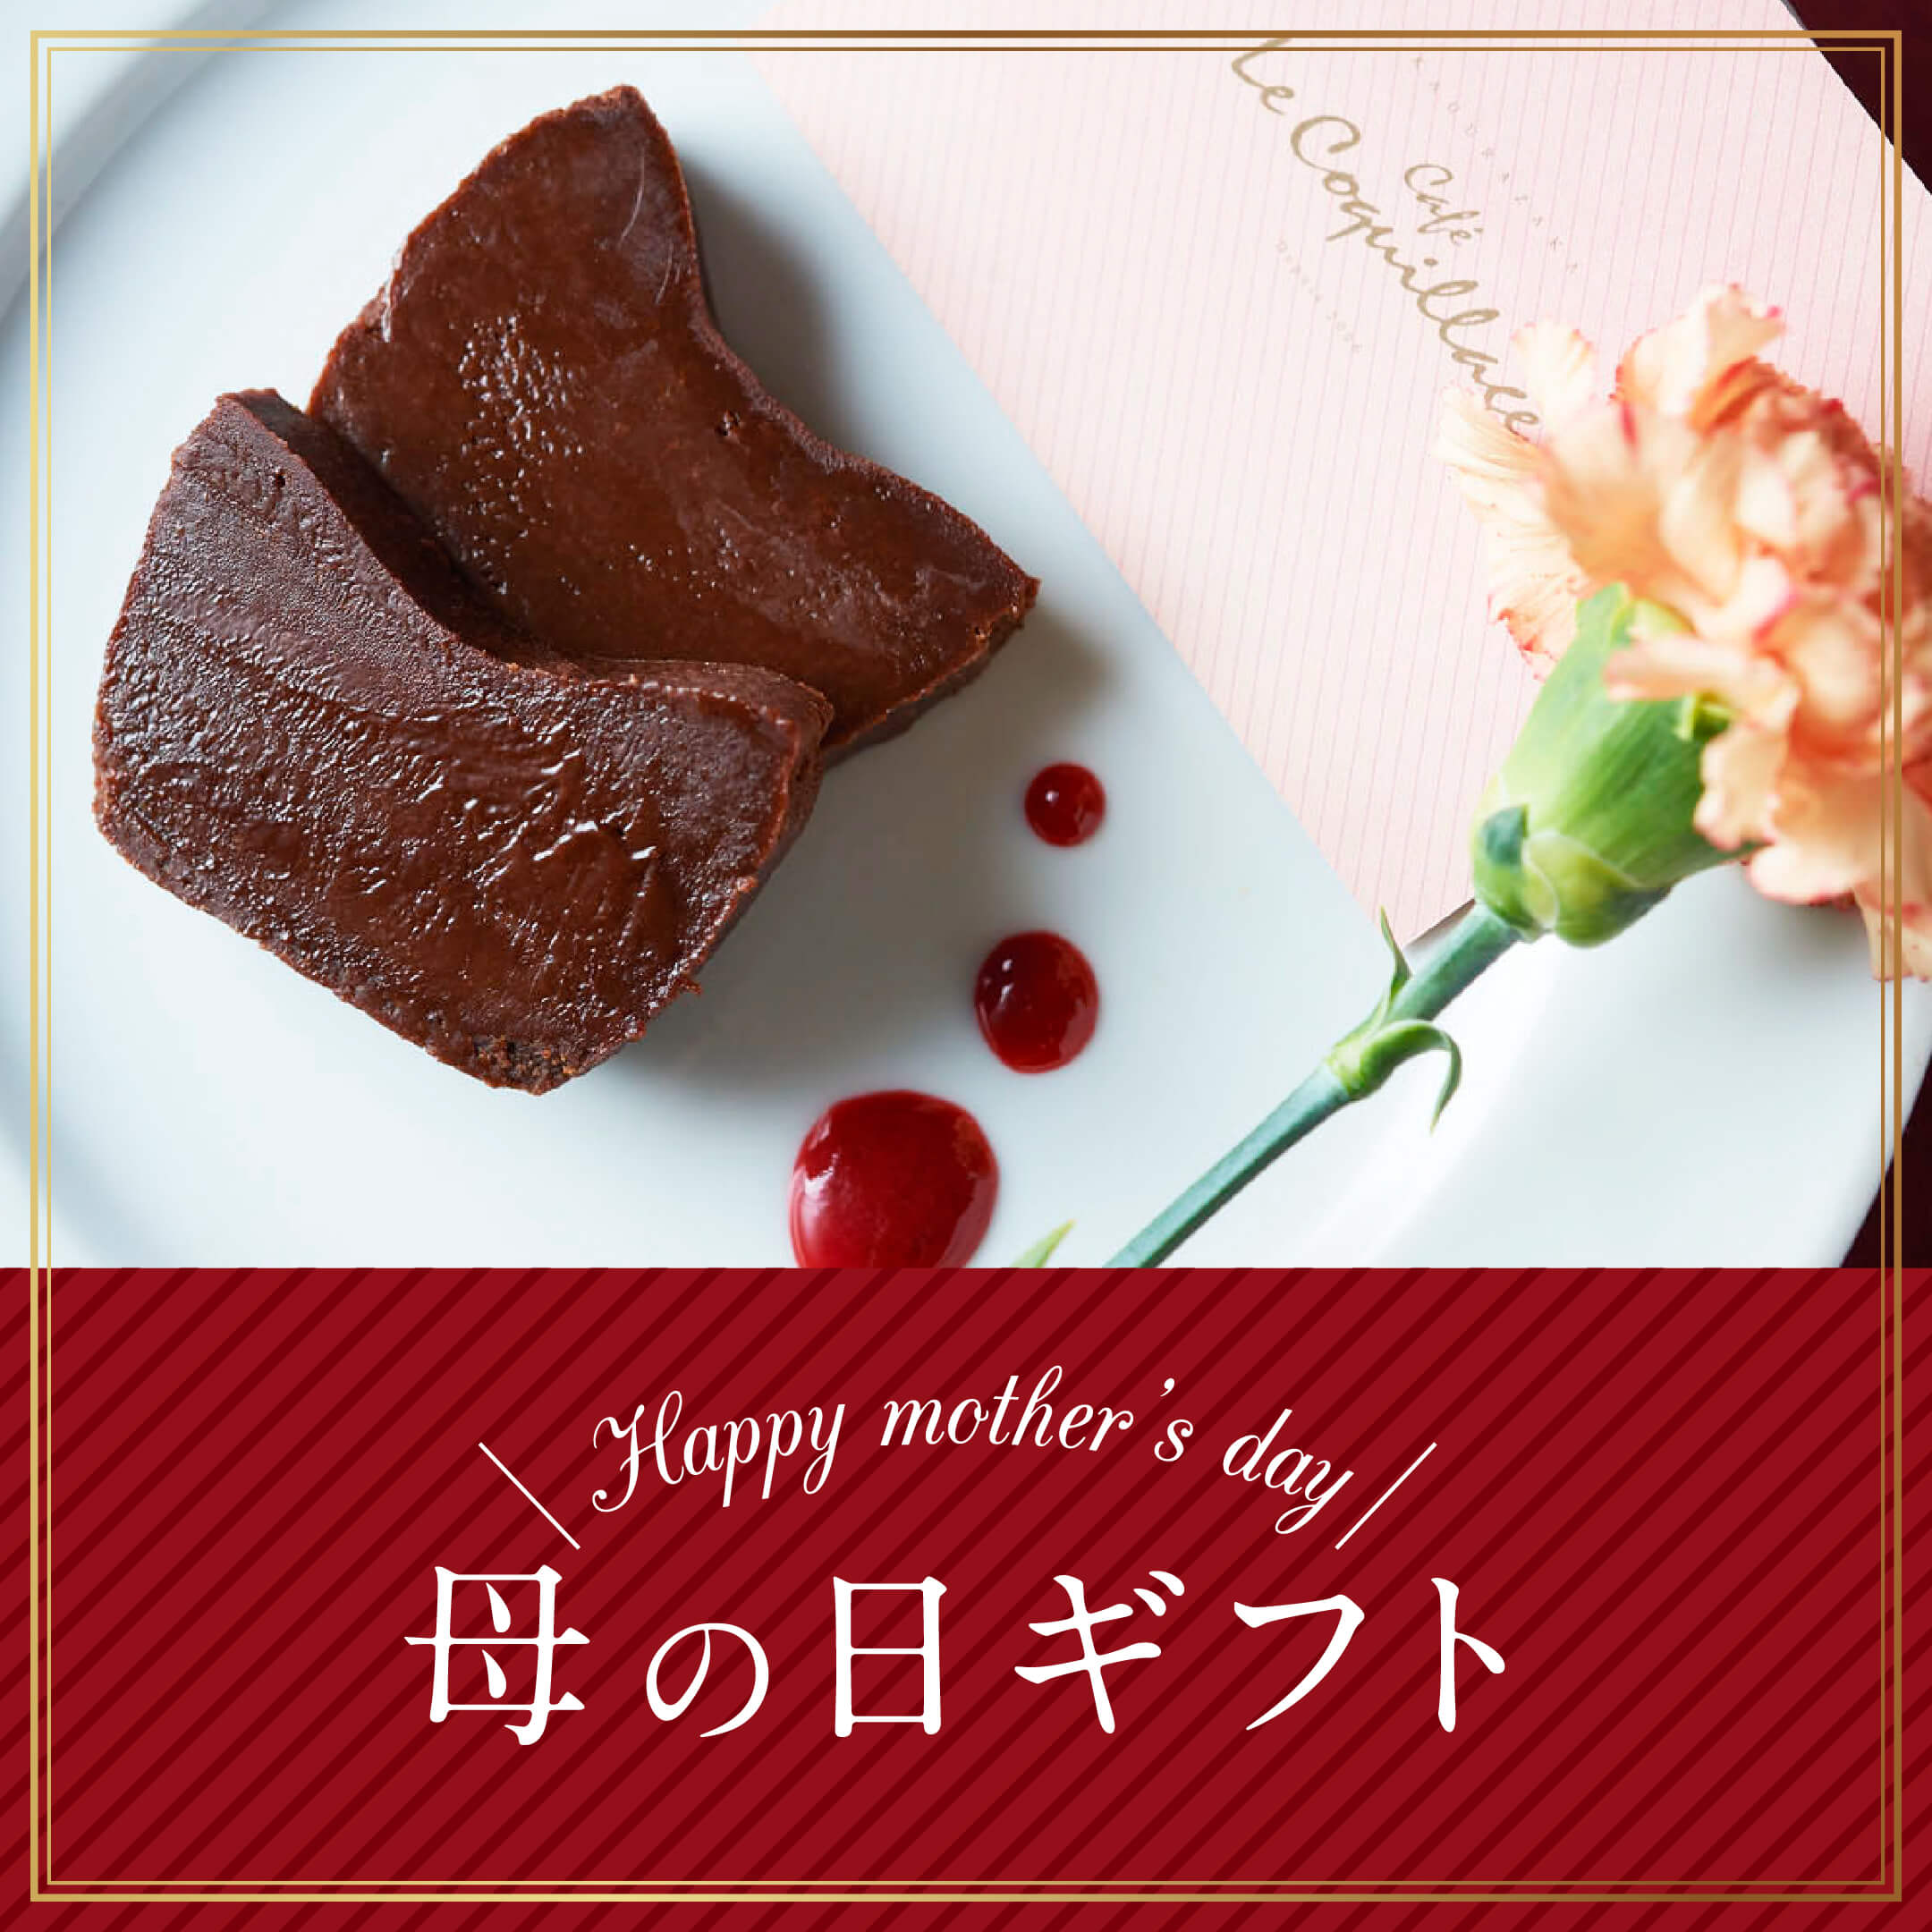 Happy mother's day 母の日ギフト 2023.5.14 SUN